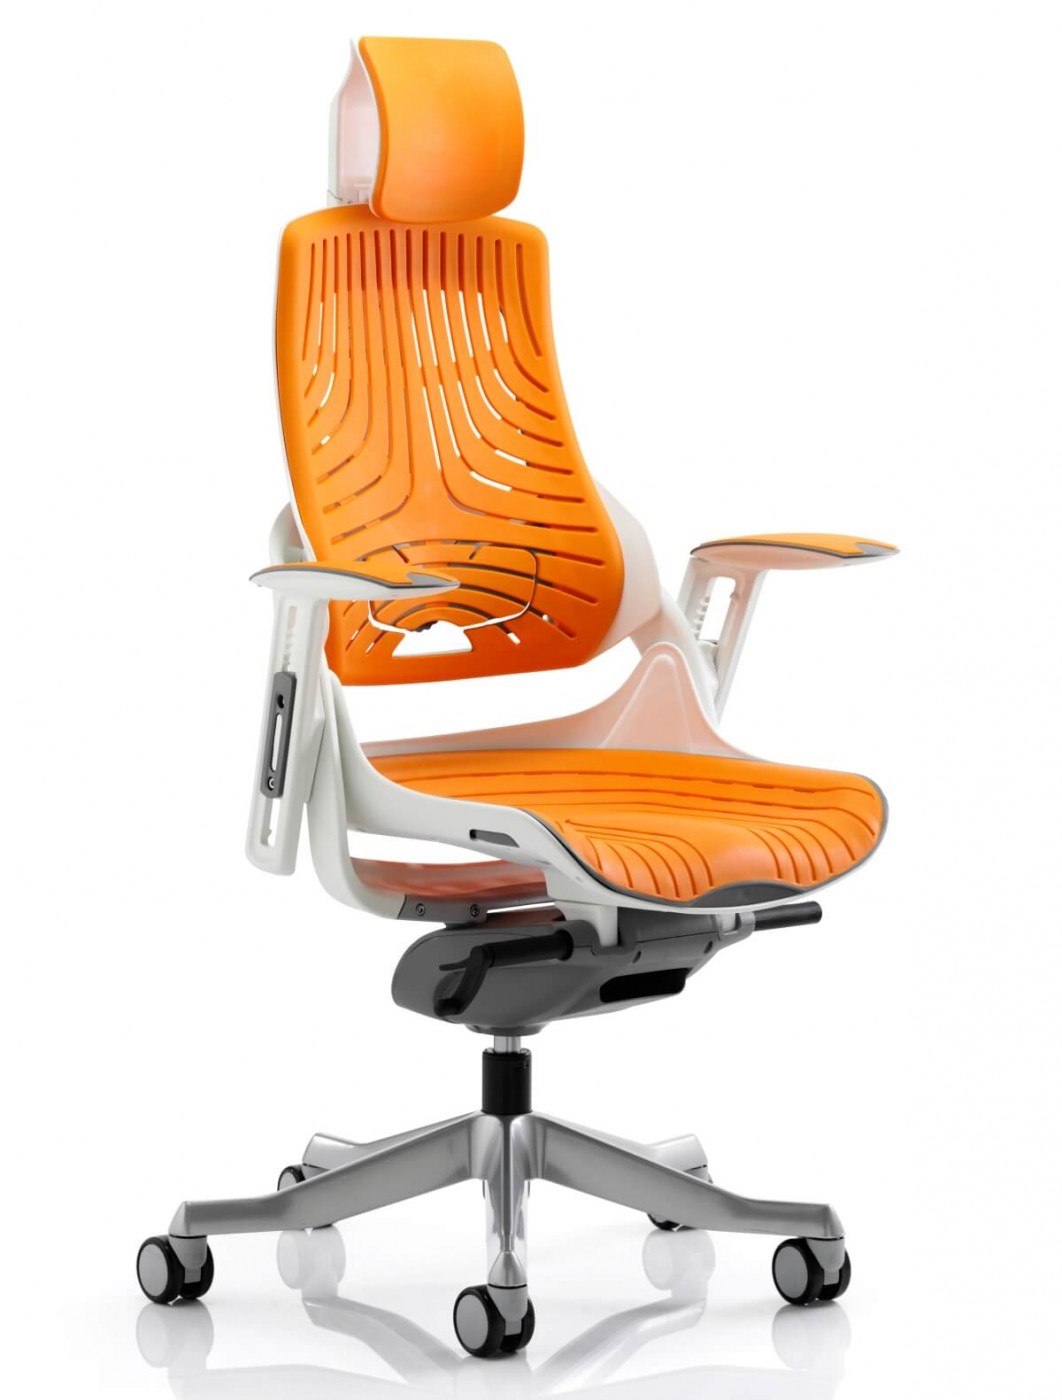 Zure Executive Elastomer Office Chair, Orange Leather Office Chair